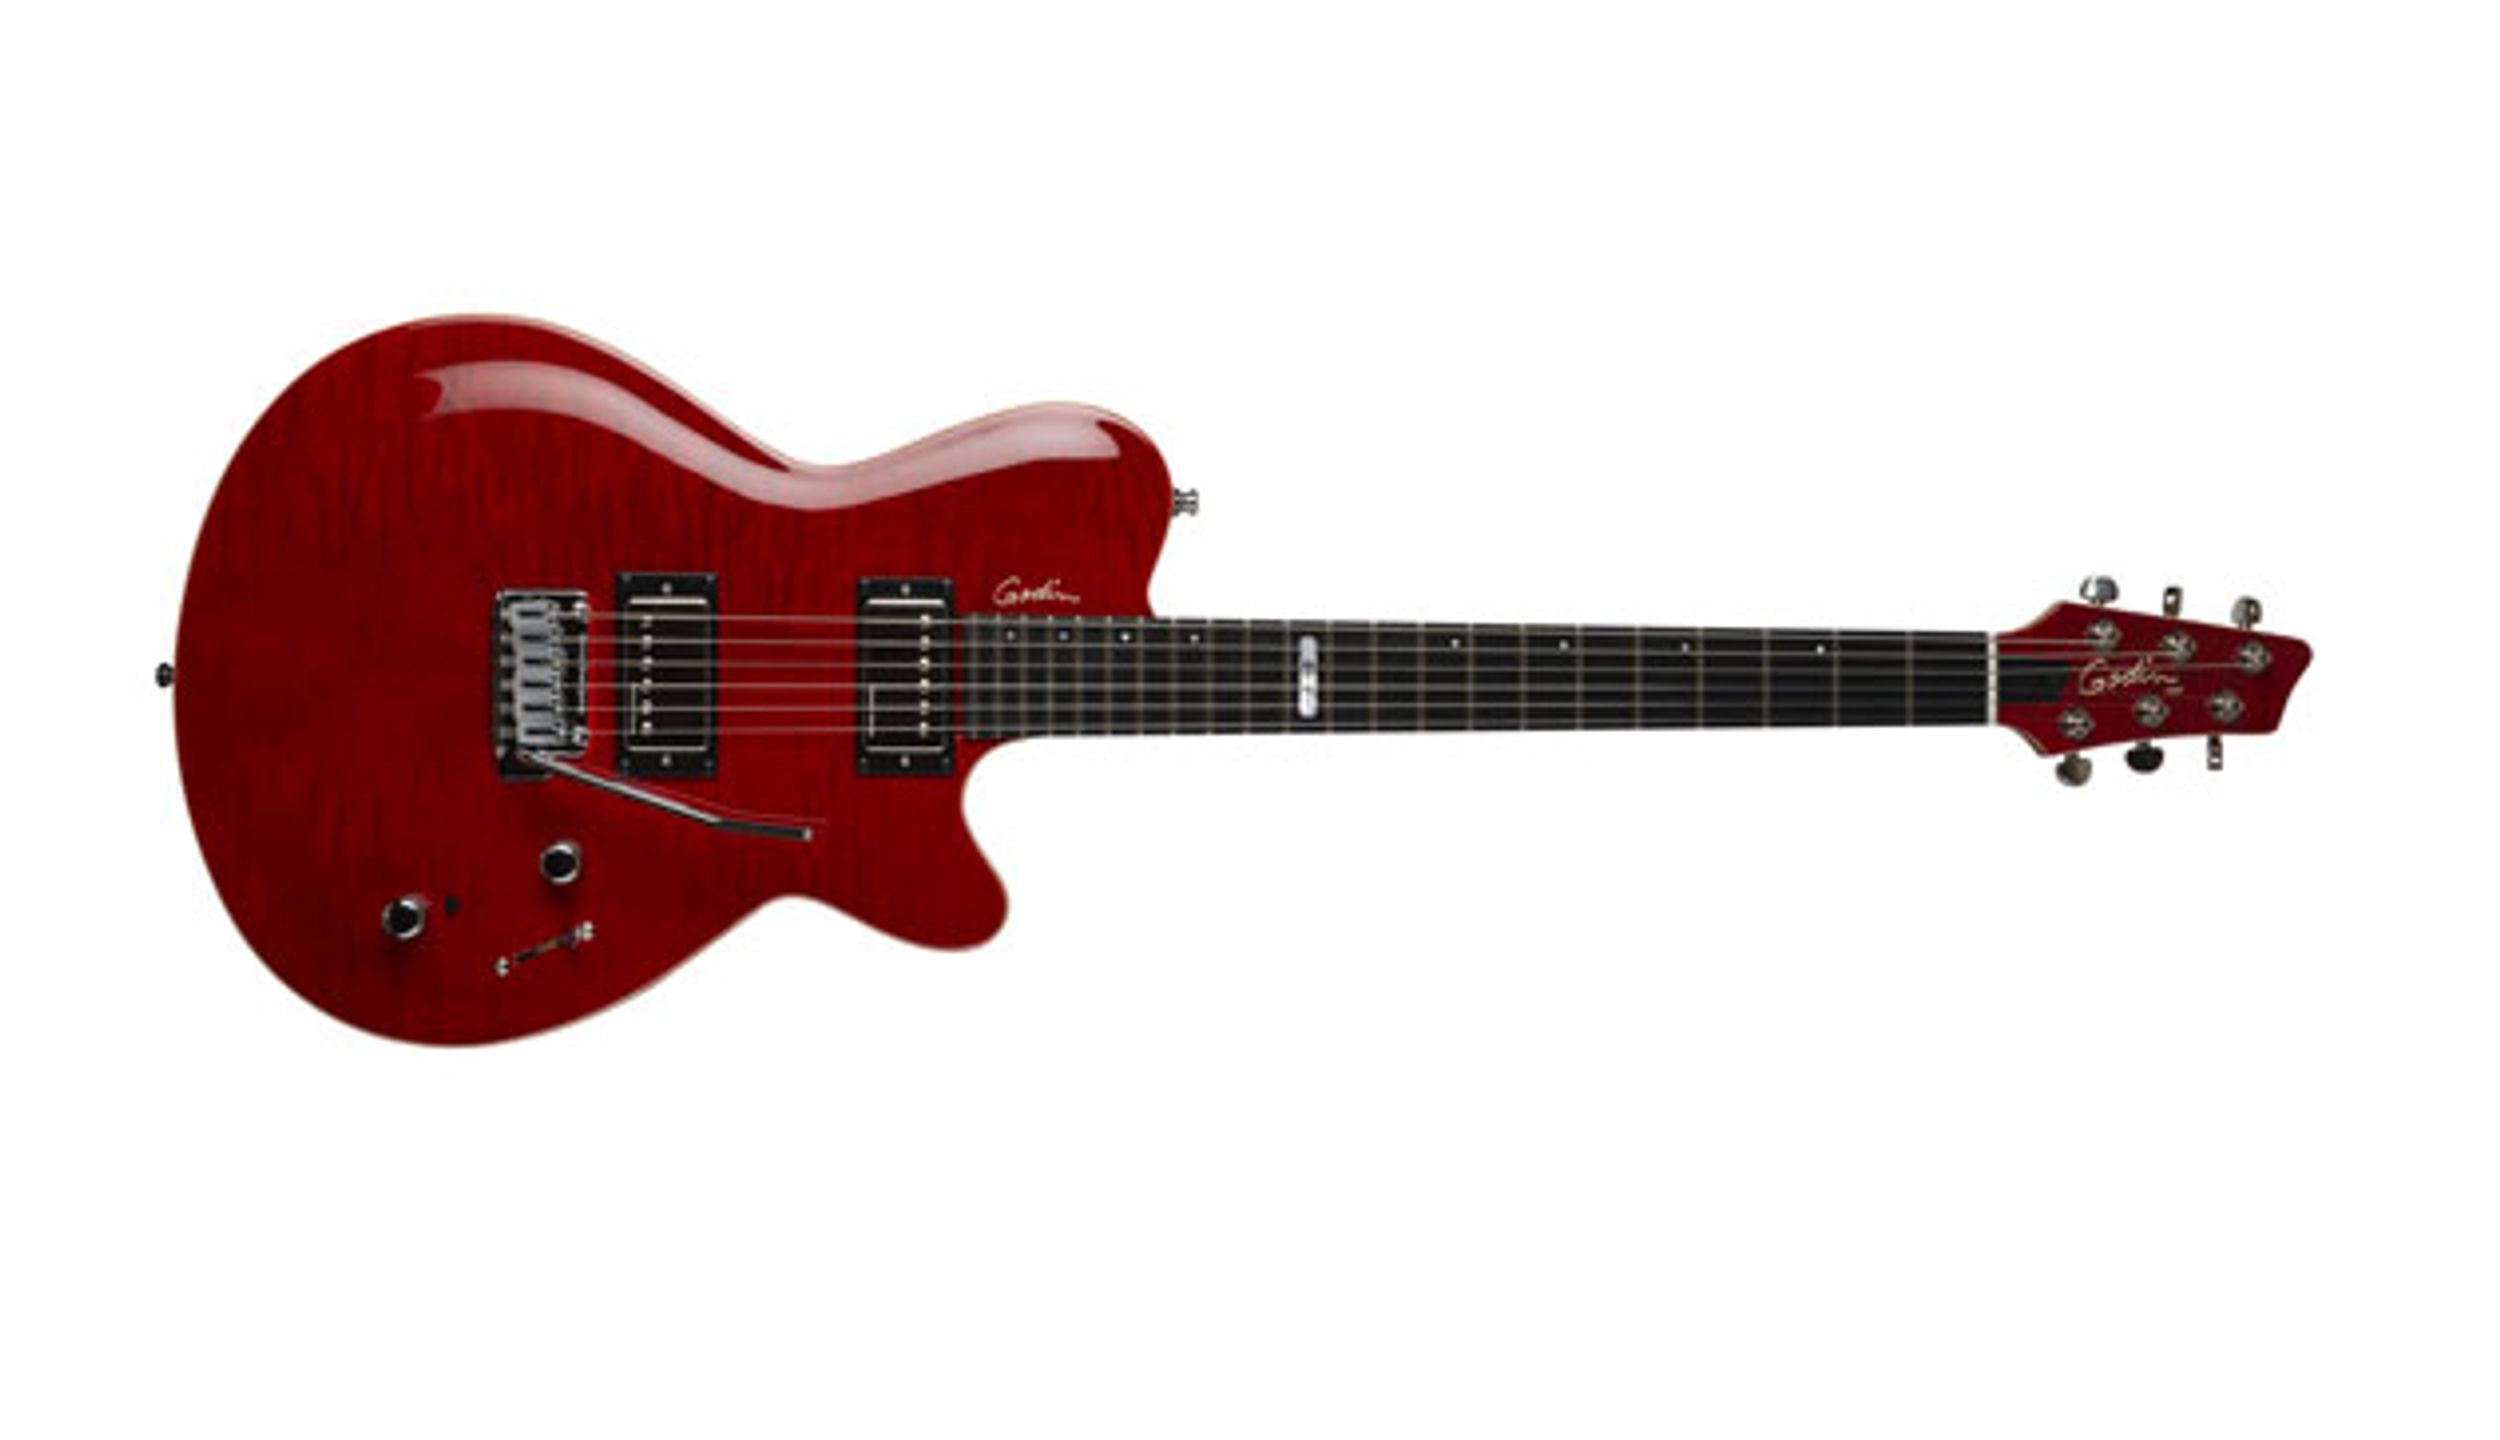 Godin Launches the Daryl Stuermer DS-1 Signature Edition Guitar